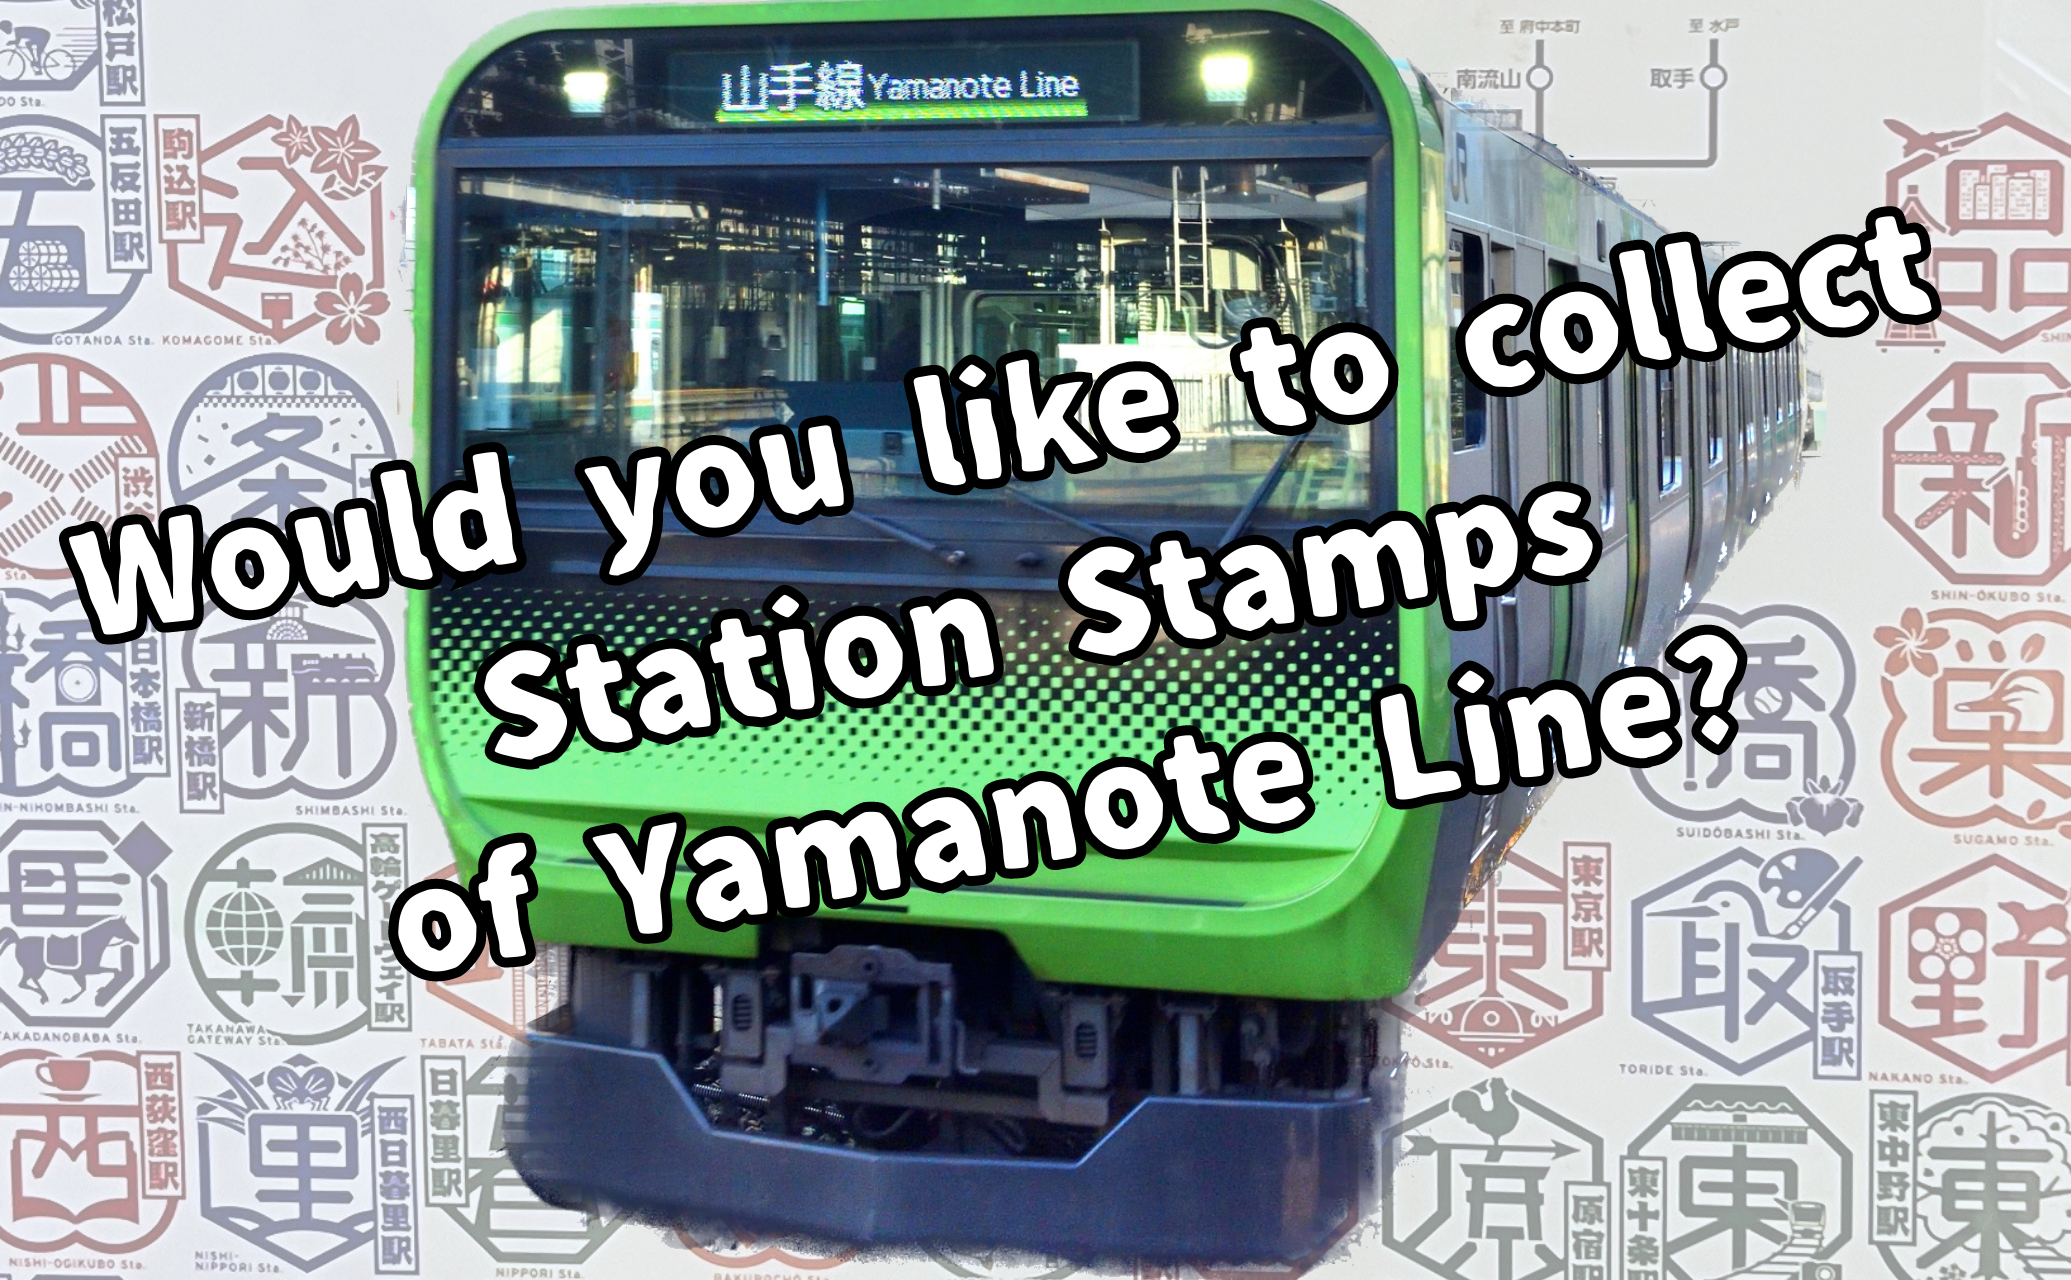 Would you like to collect station stamps in Yamanote line?